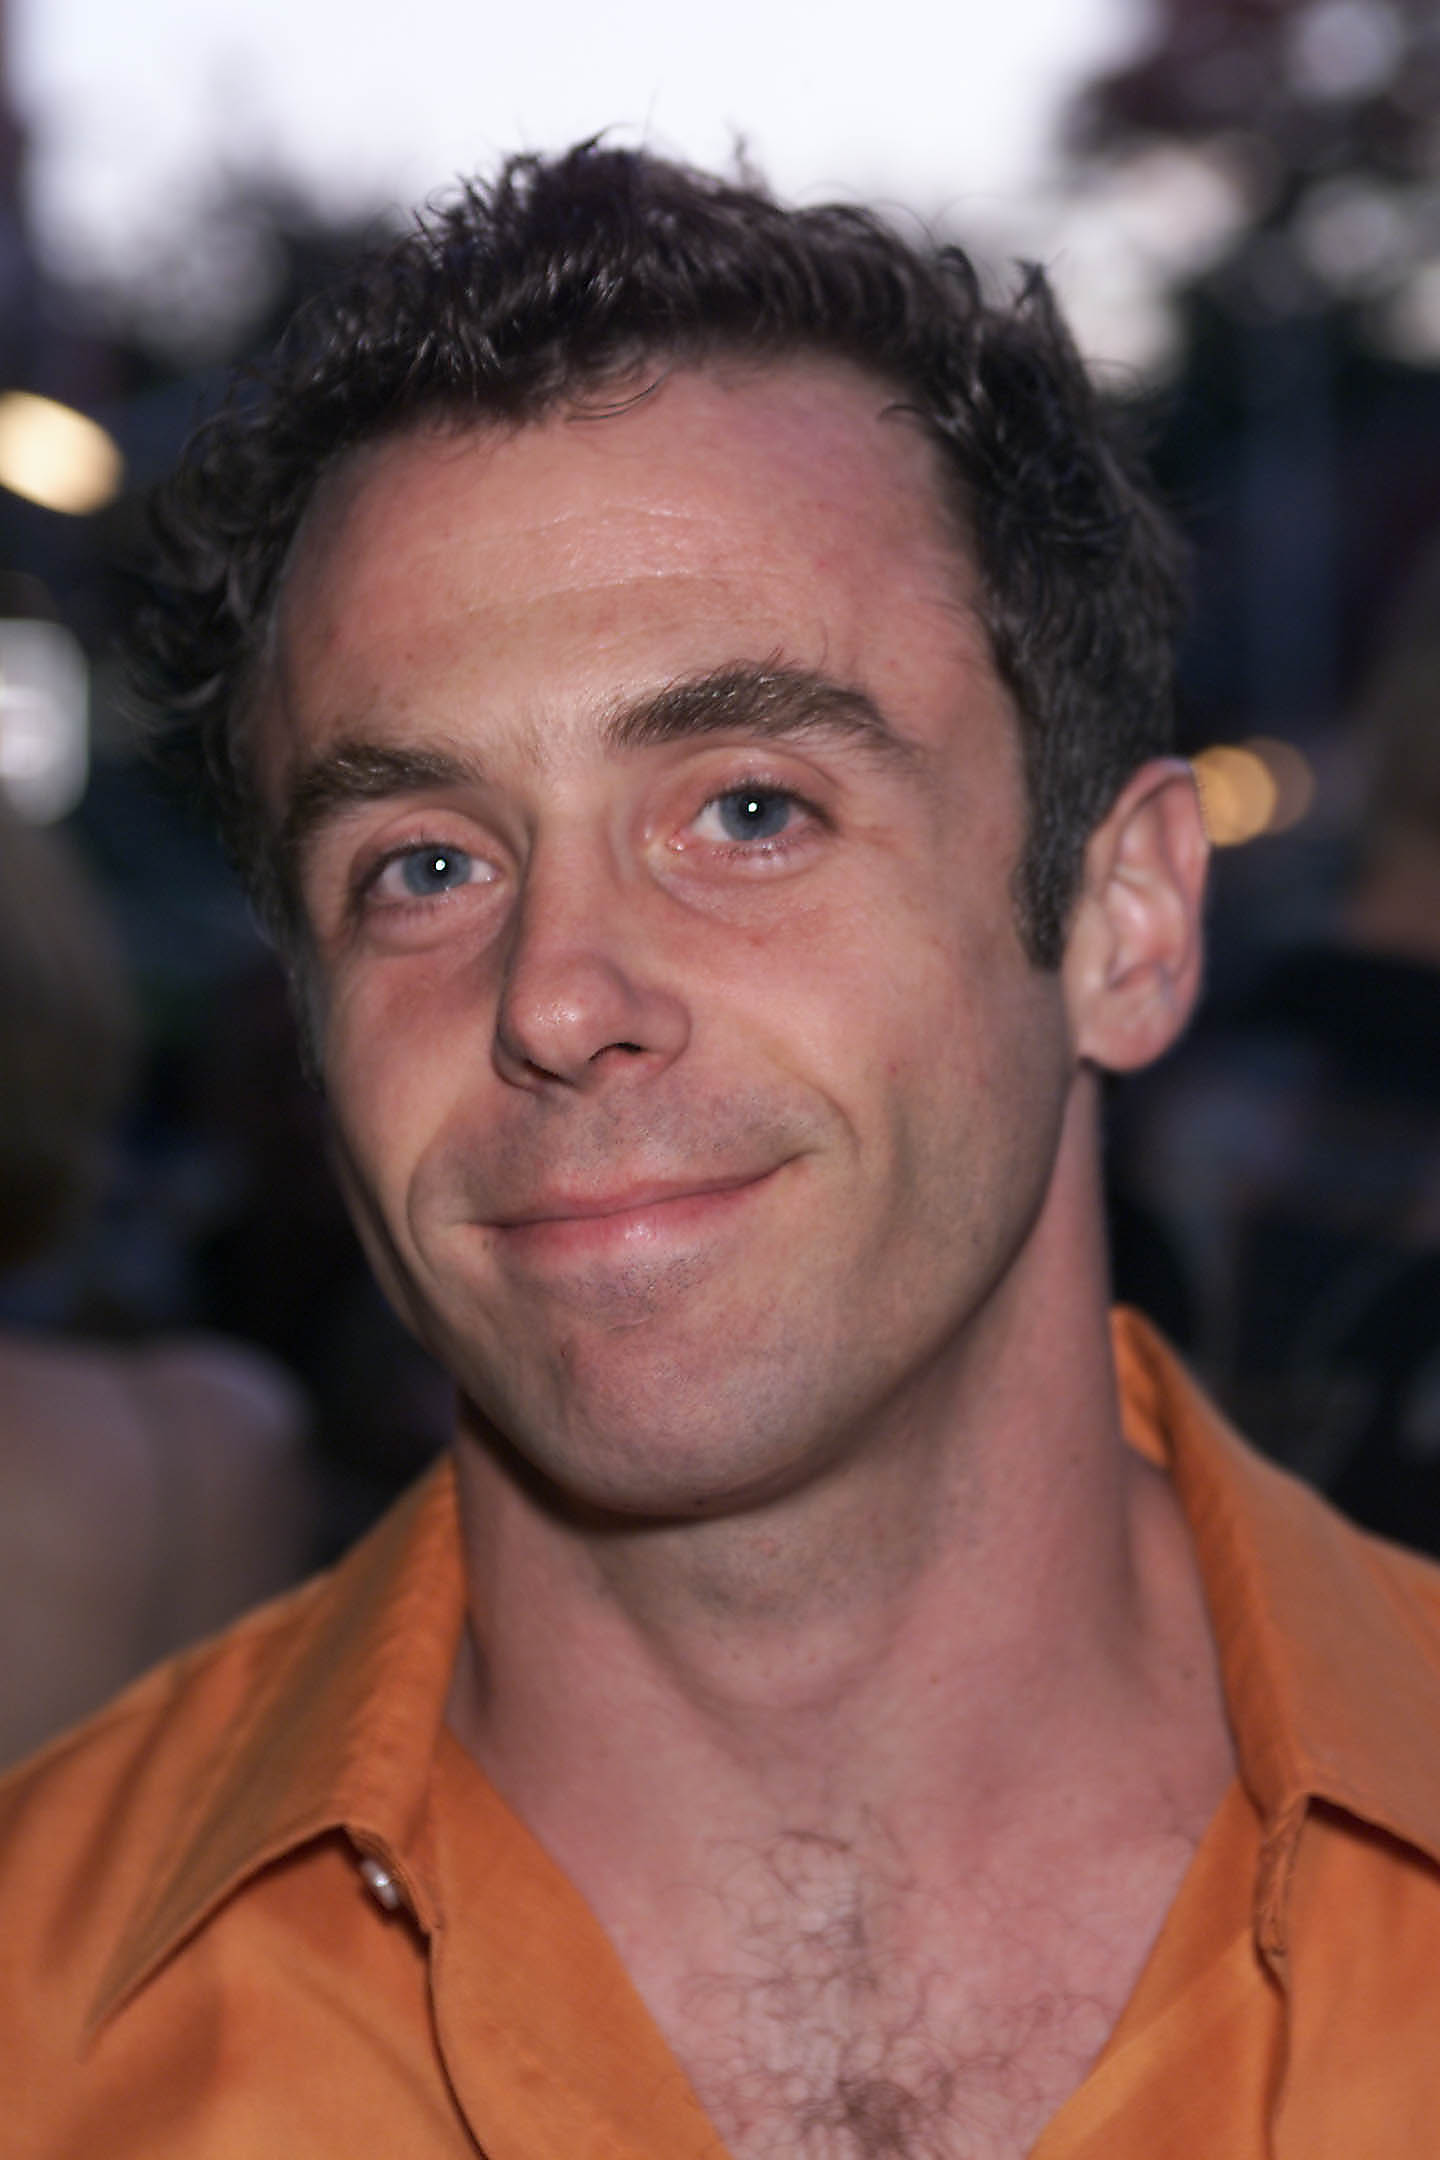 David Eigenberg at the Drama Department 2nd Annual Company Picnic in 2001